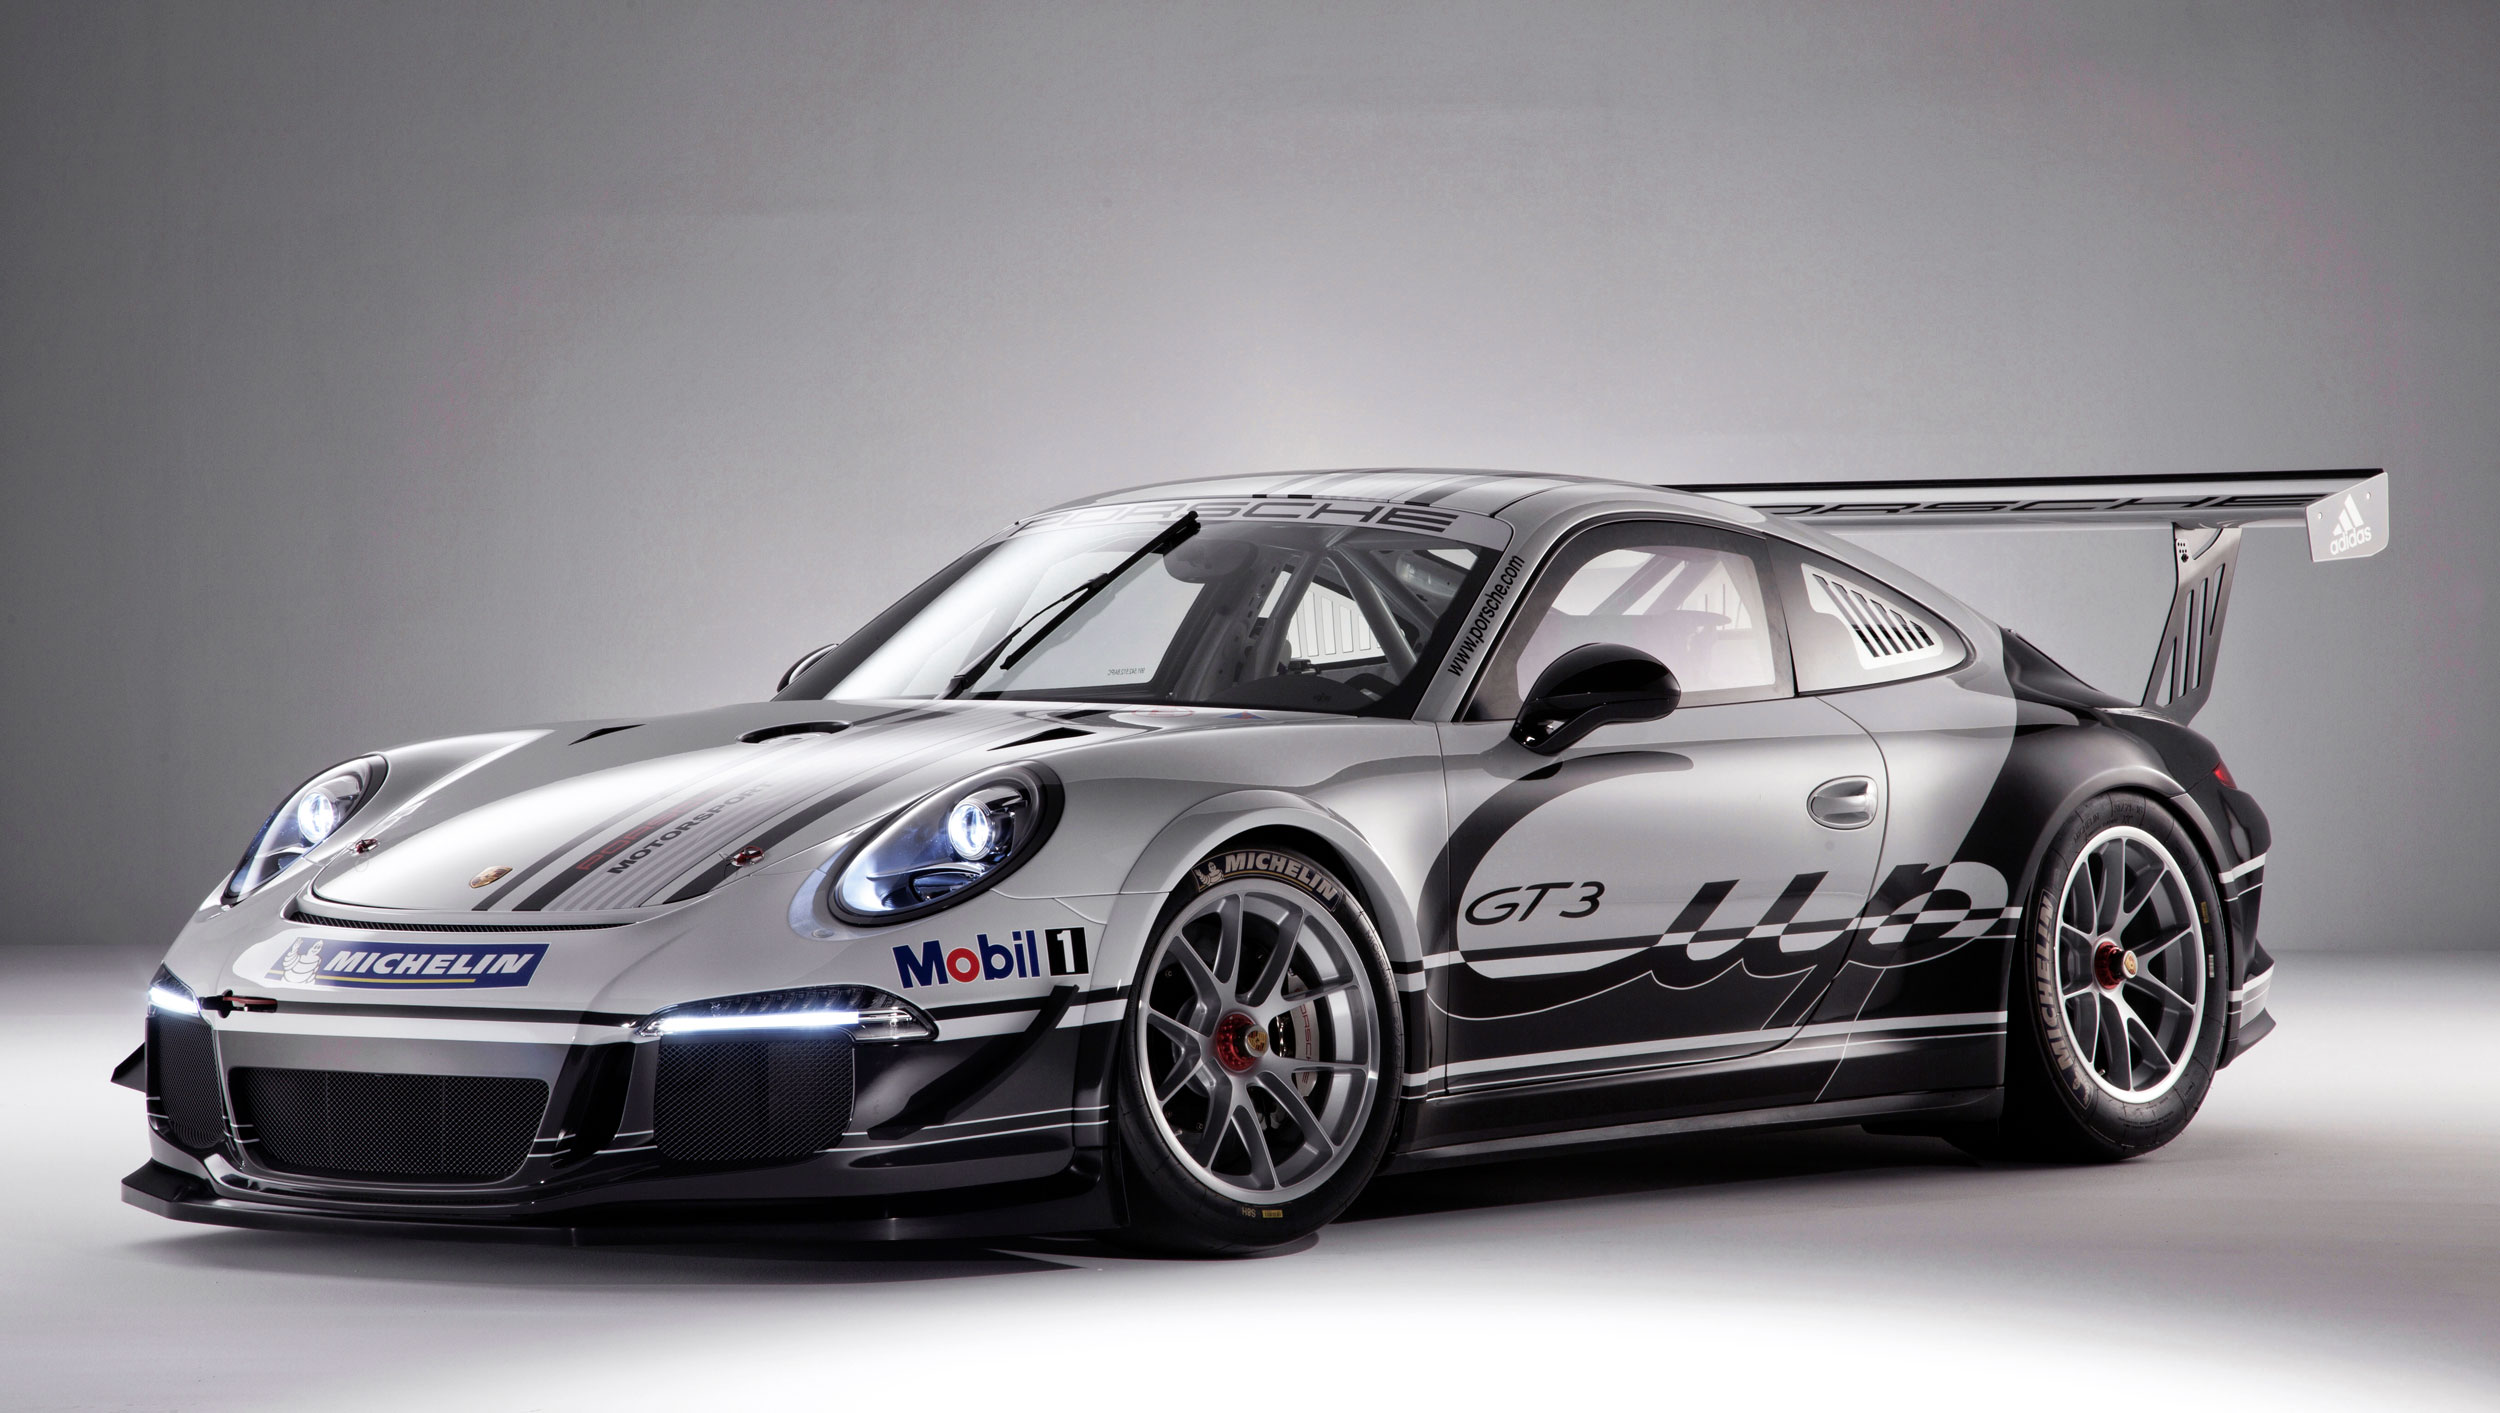 Porsche 911 GT3 Cup debuts, 991-based racer has 10 hp more than the